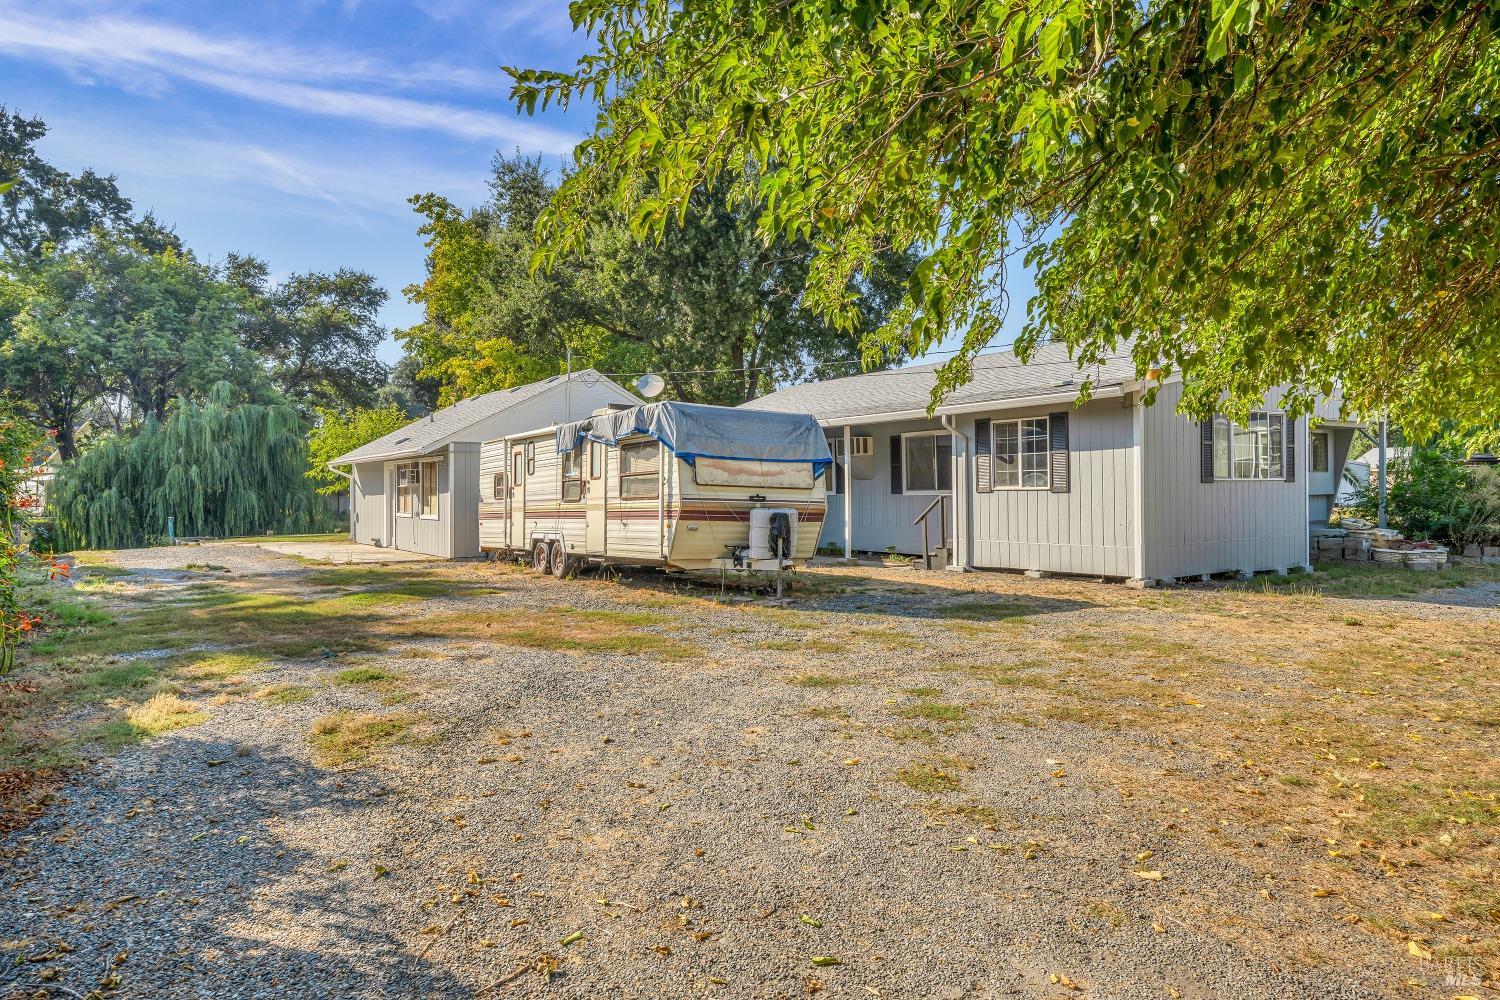 Photo of 2817 Meadow Dr in Lakeport, CA